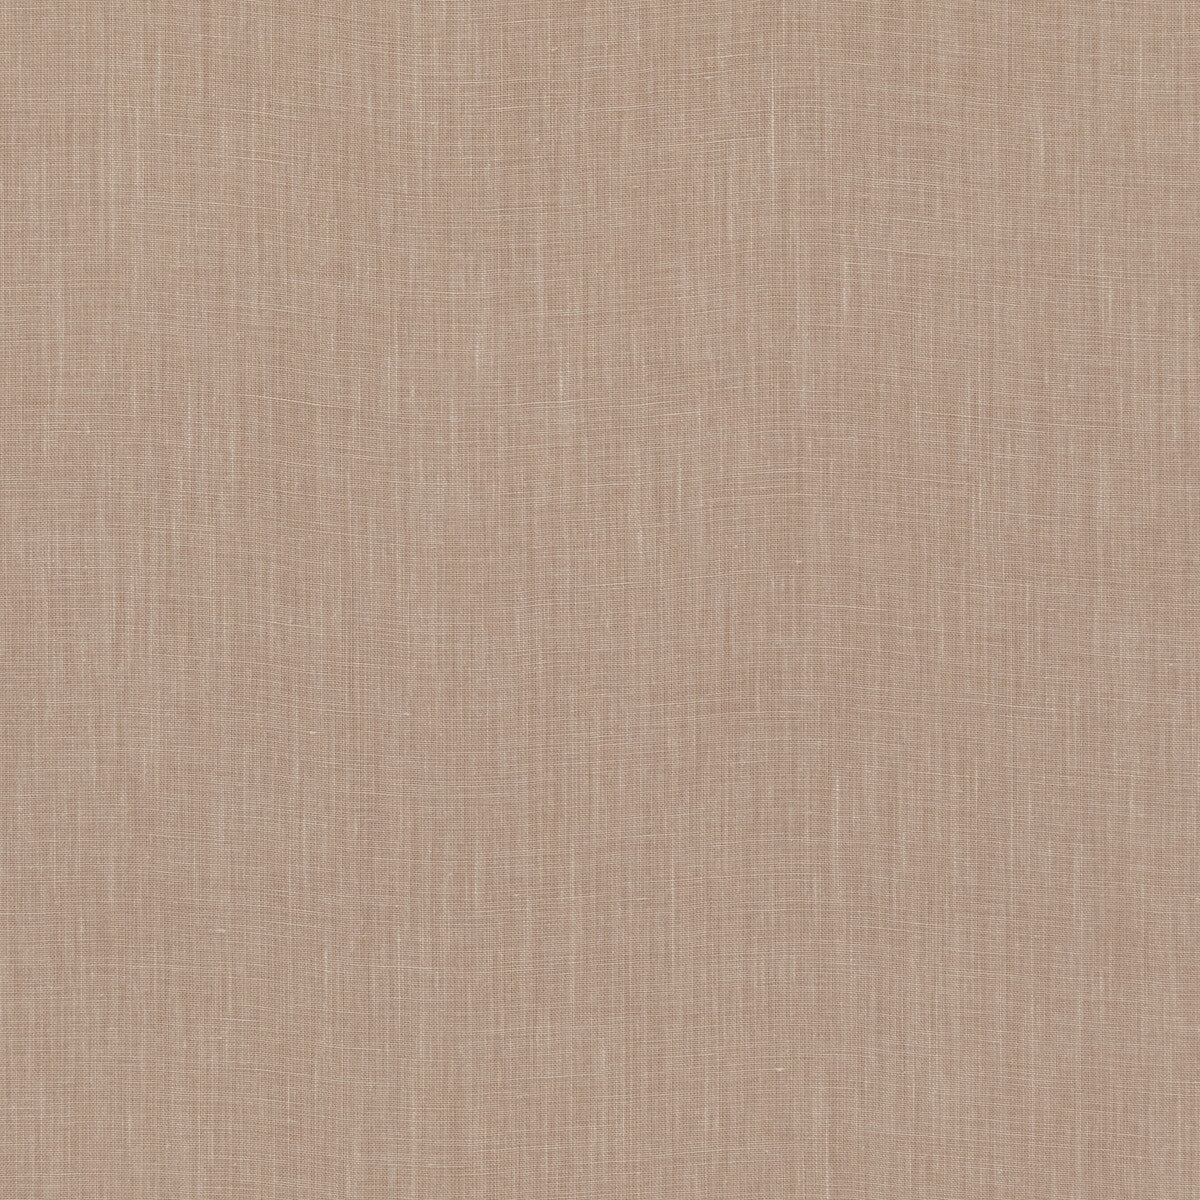 Kravet Basics fabric in 33767-17 color - pattern 33767.17.0 - by Kravet Basics in the Perfect Plains collection